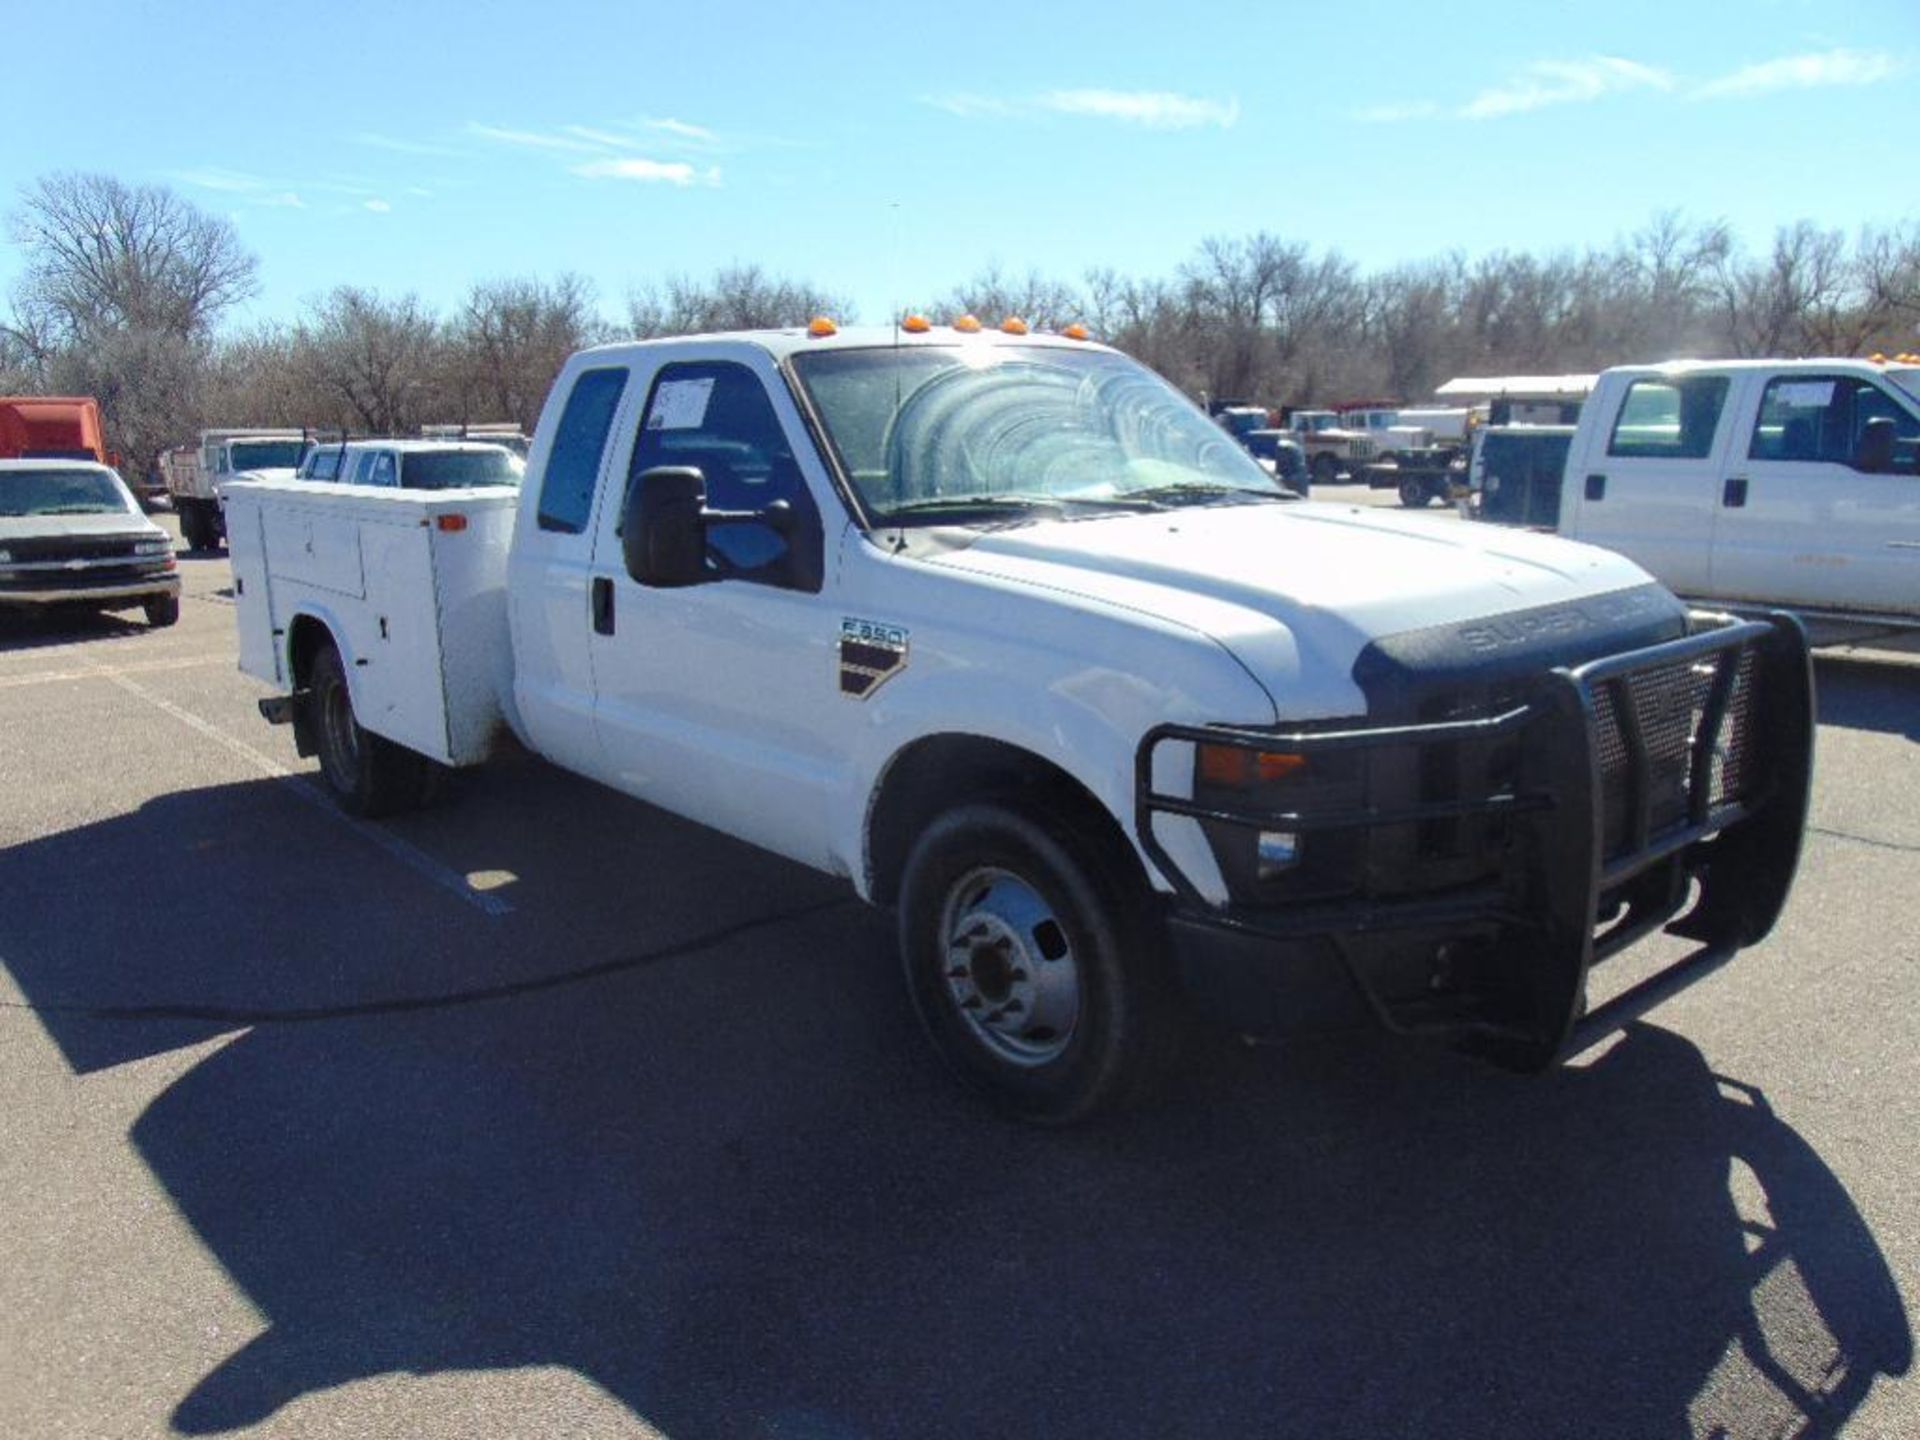 2007 Ford F350 Extcab Service Truck s/n1fdwx36r18eb08733,pwr stroke,auto,odometer reads 213629 - Image 3 of 3